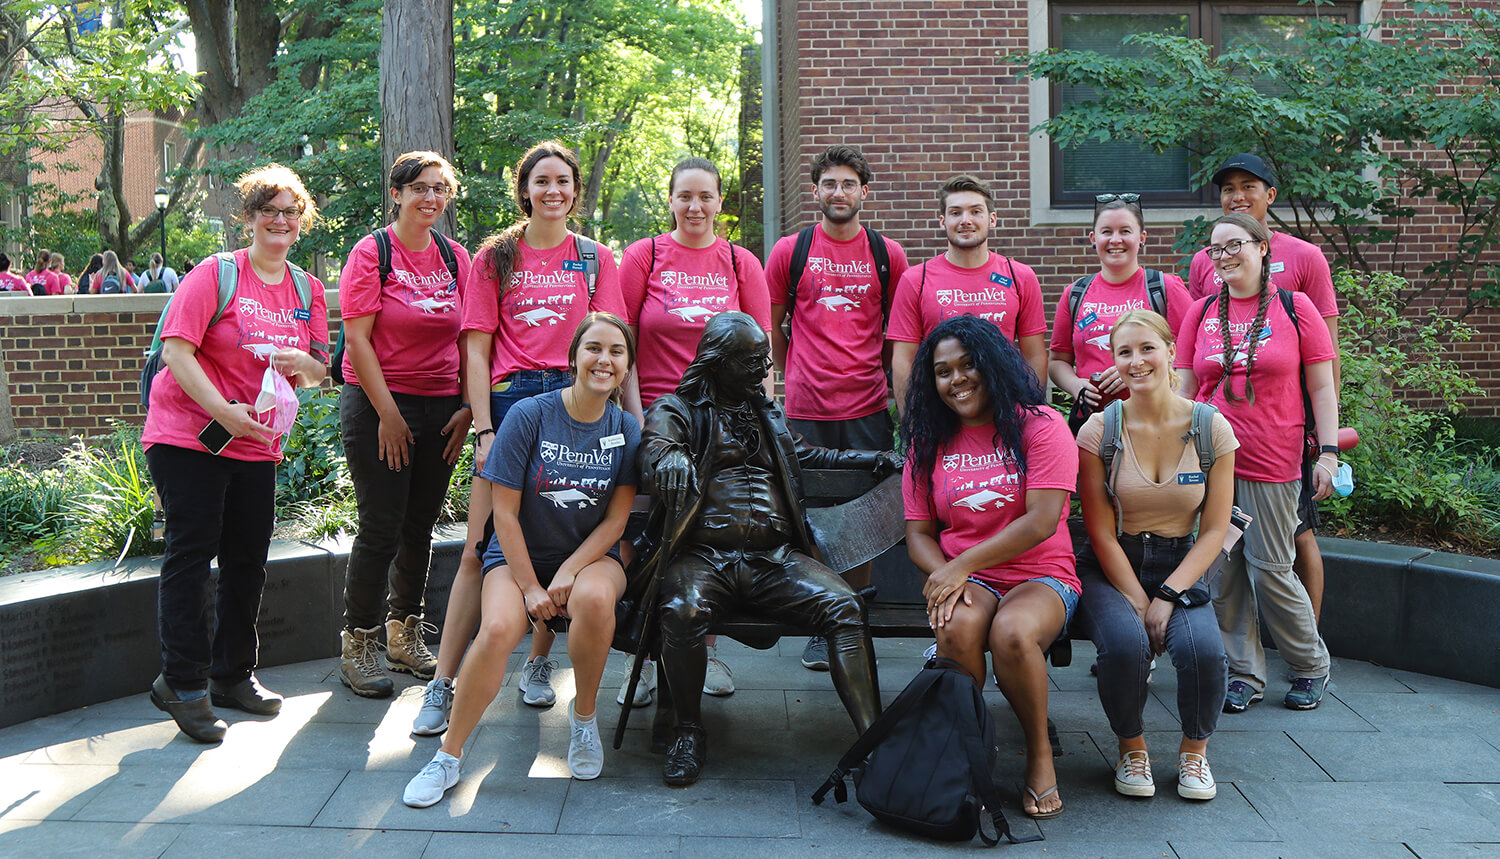 Members of V'25 visit the Benjamin Franklin statue during their tour of Penn's campus.